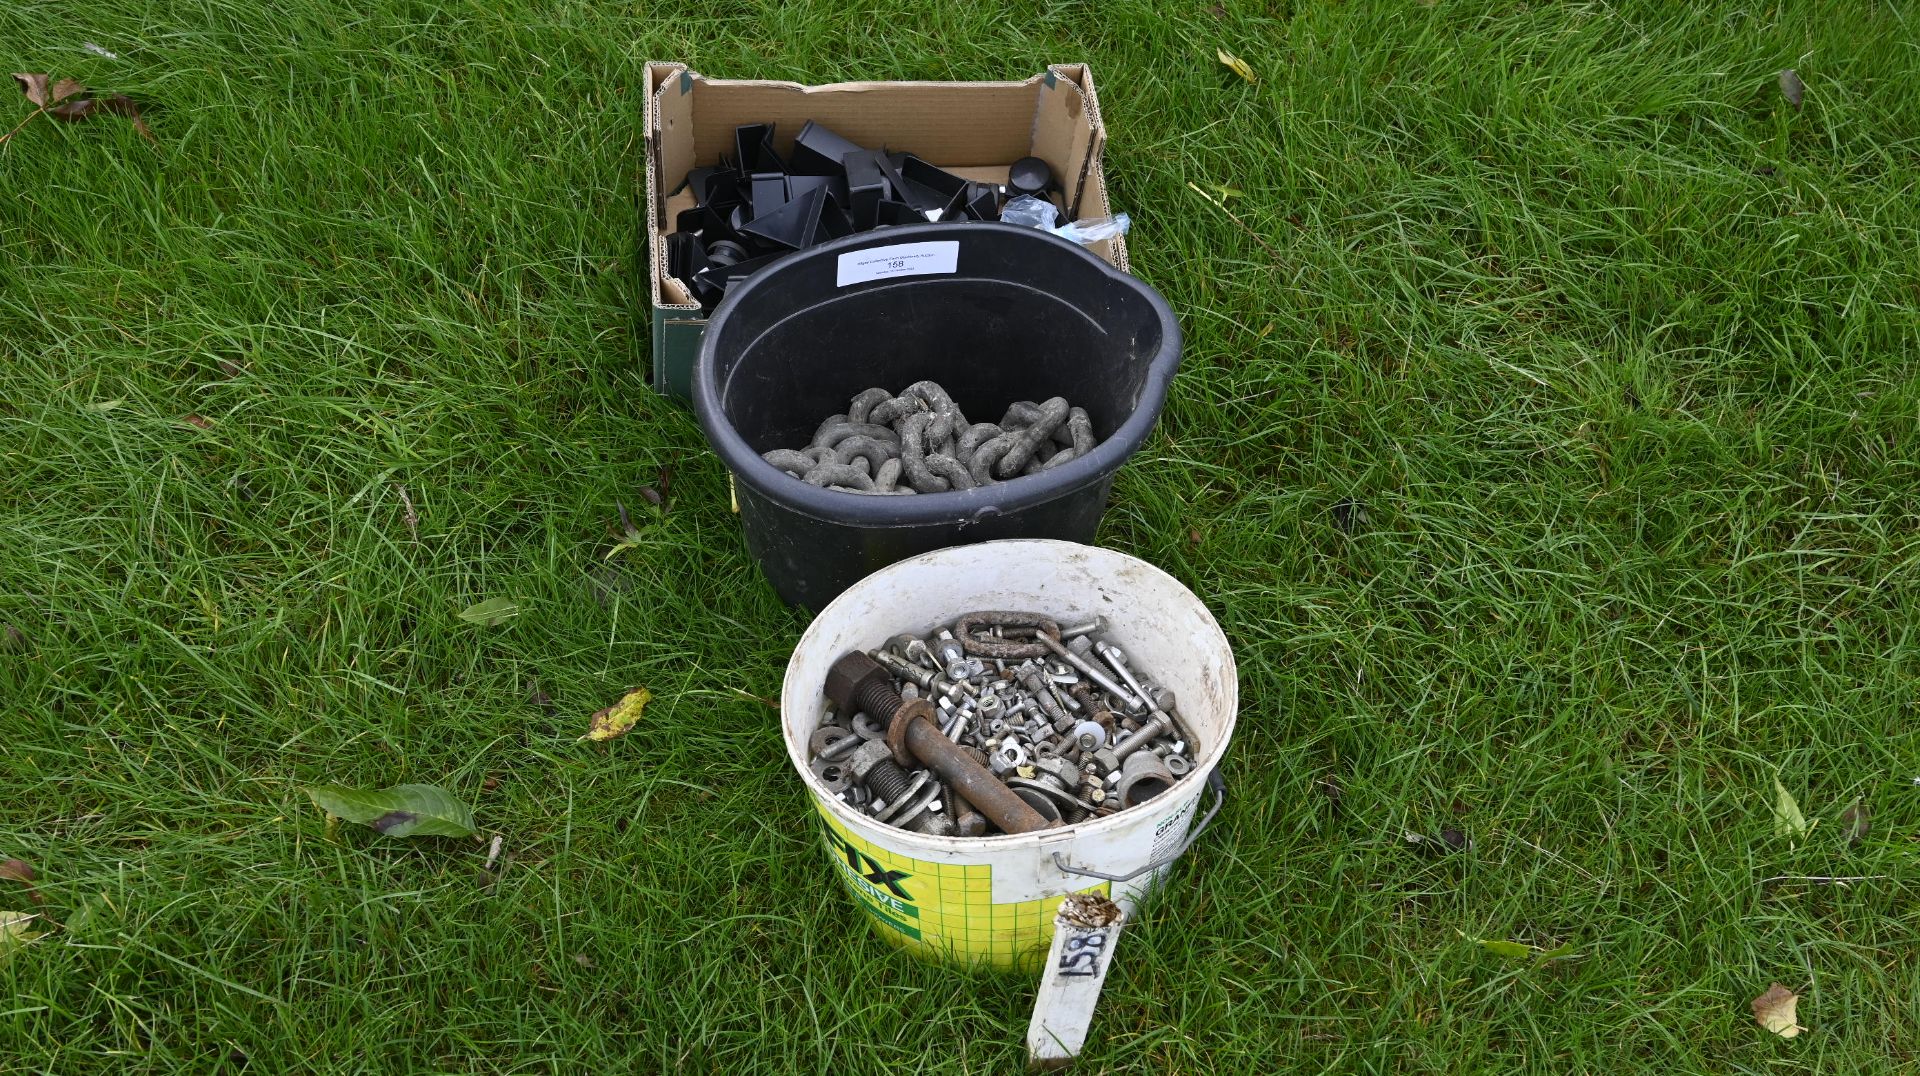 Tractor tow chain + bucket of assorted bolts